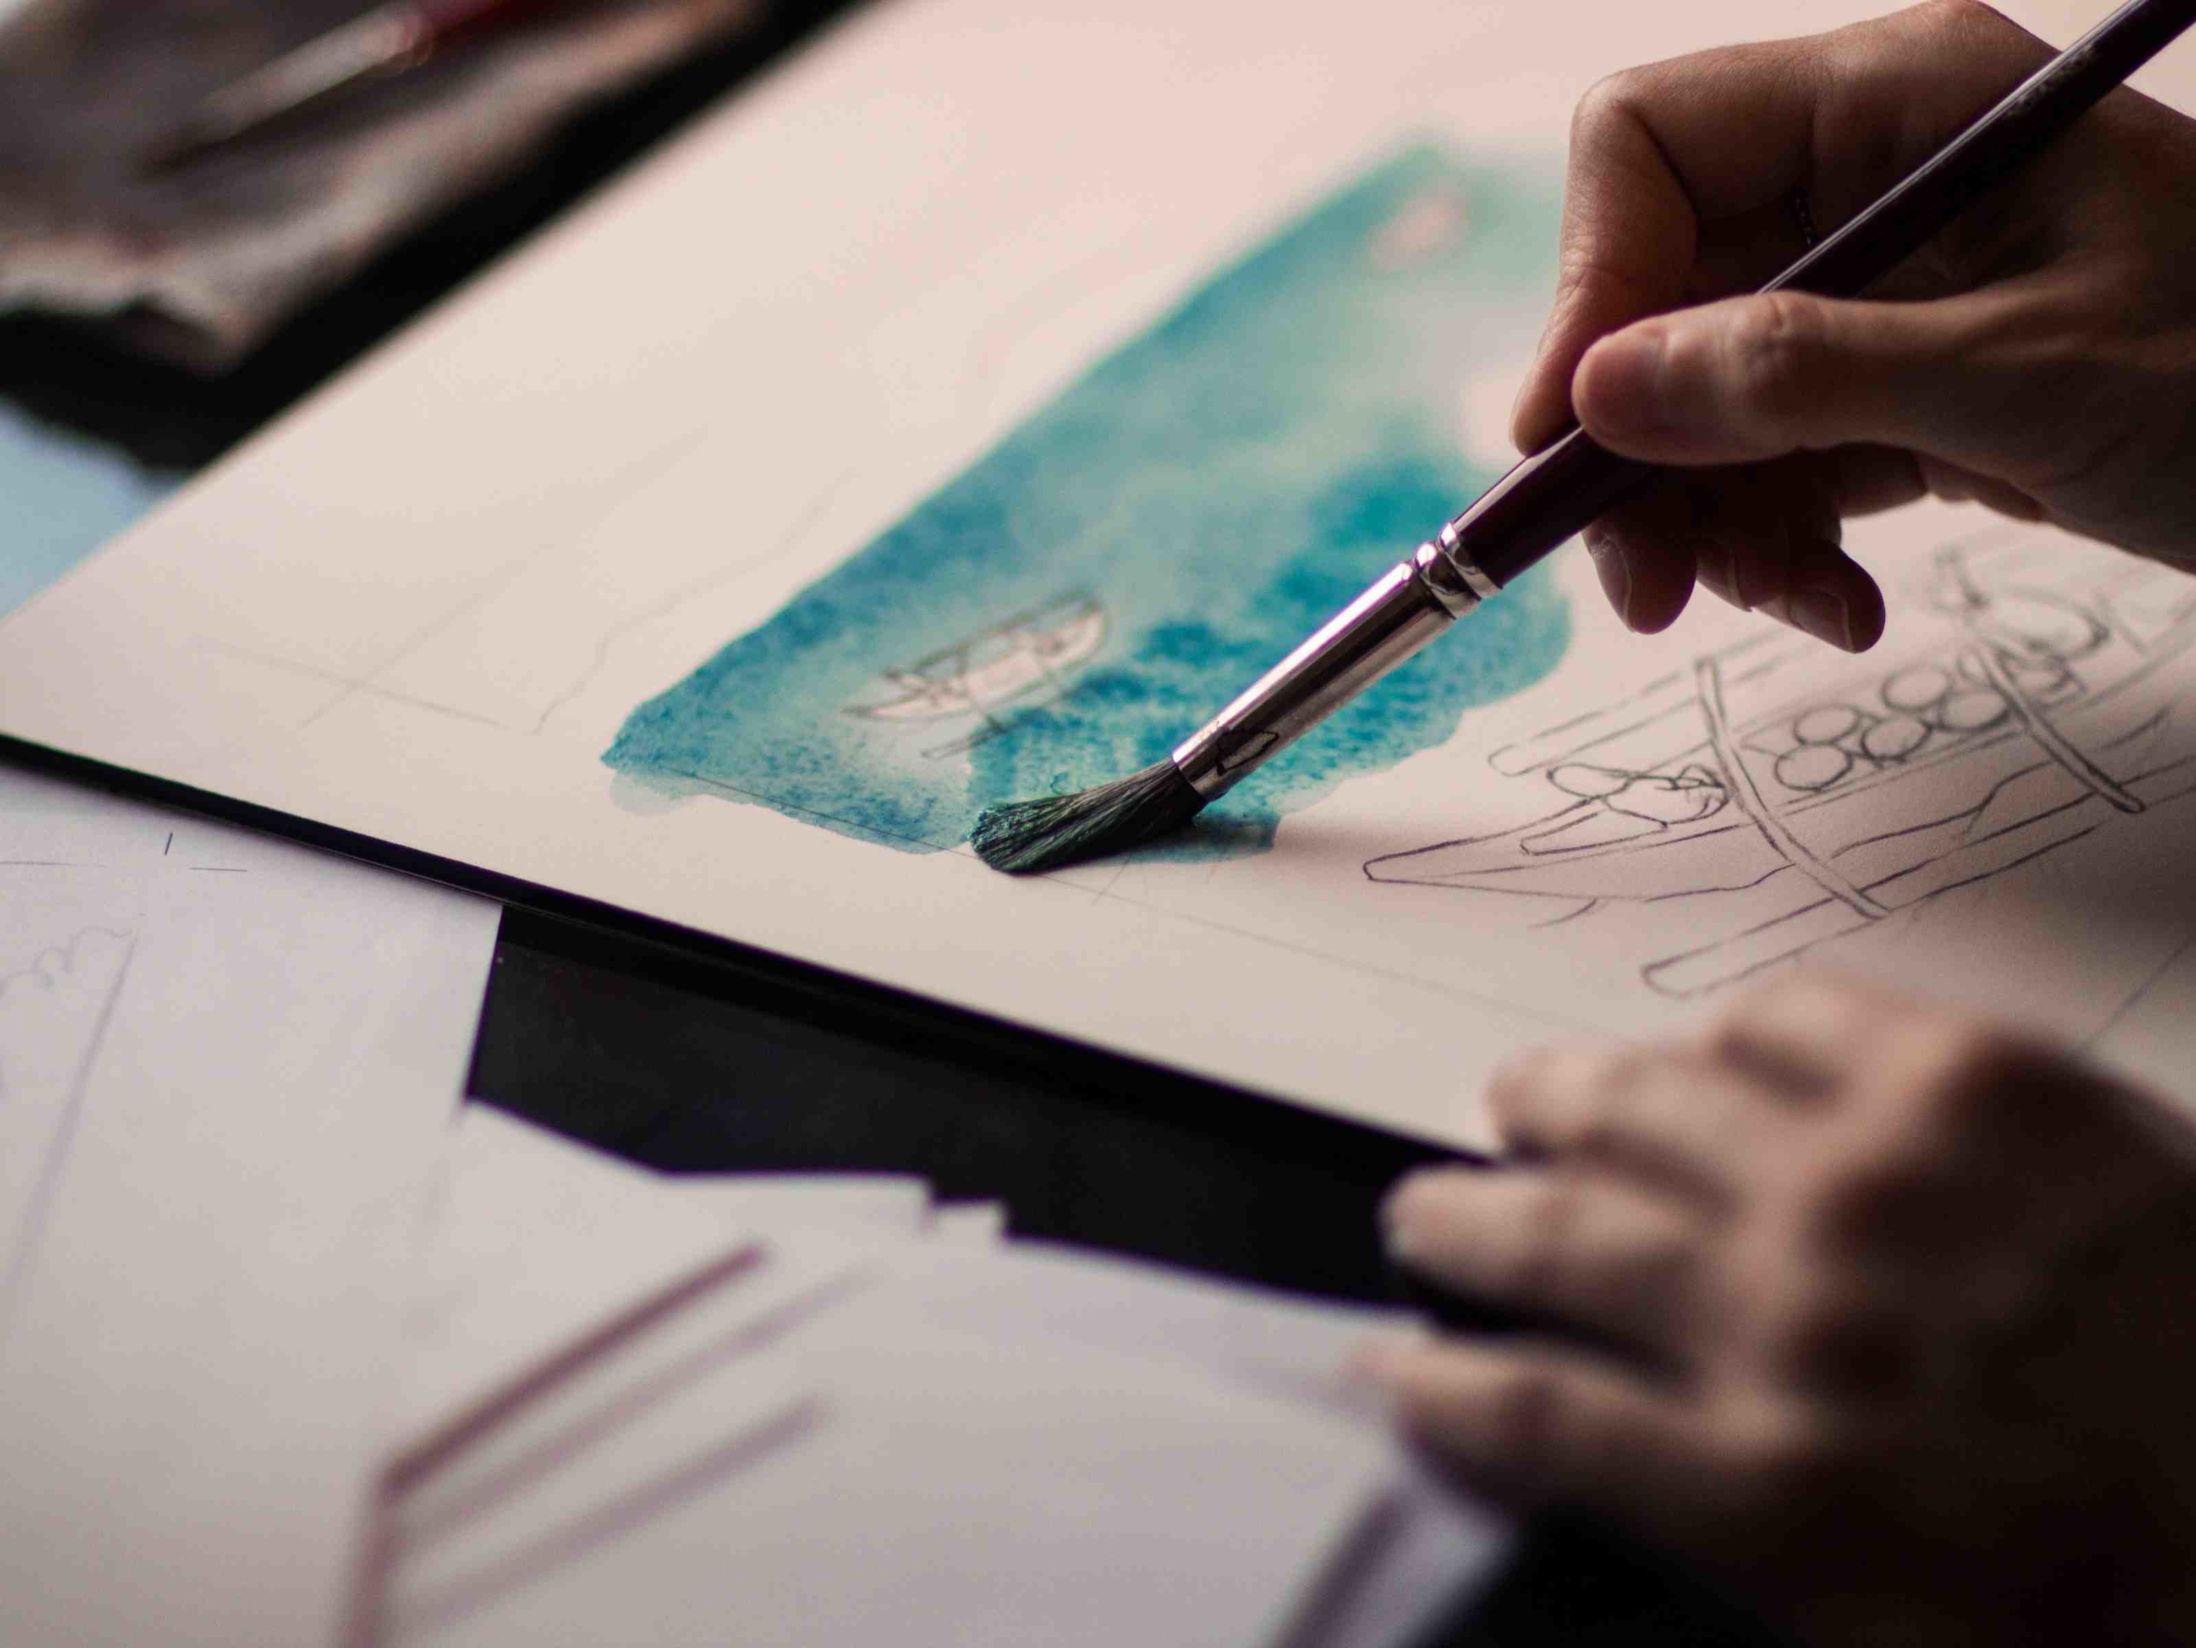 The Best Online Art Classes - Learn to Draw & Paint